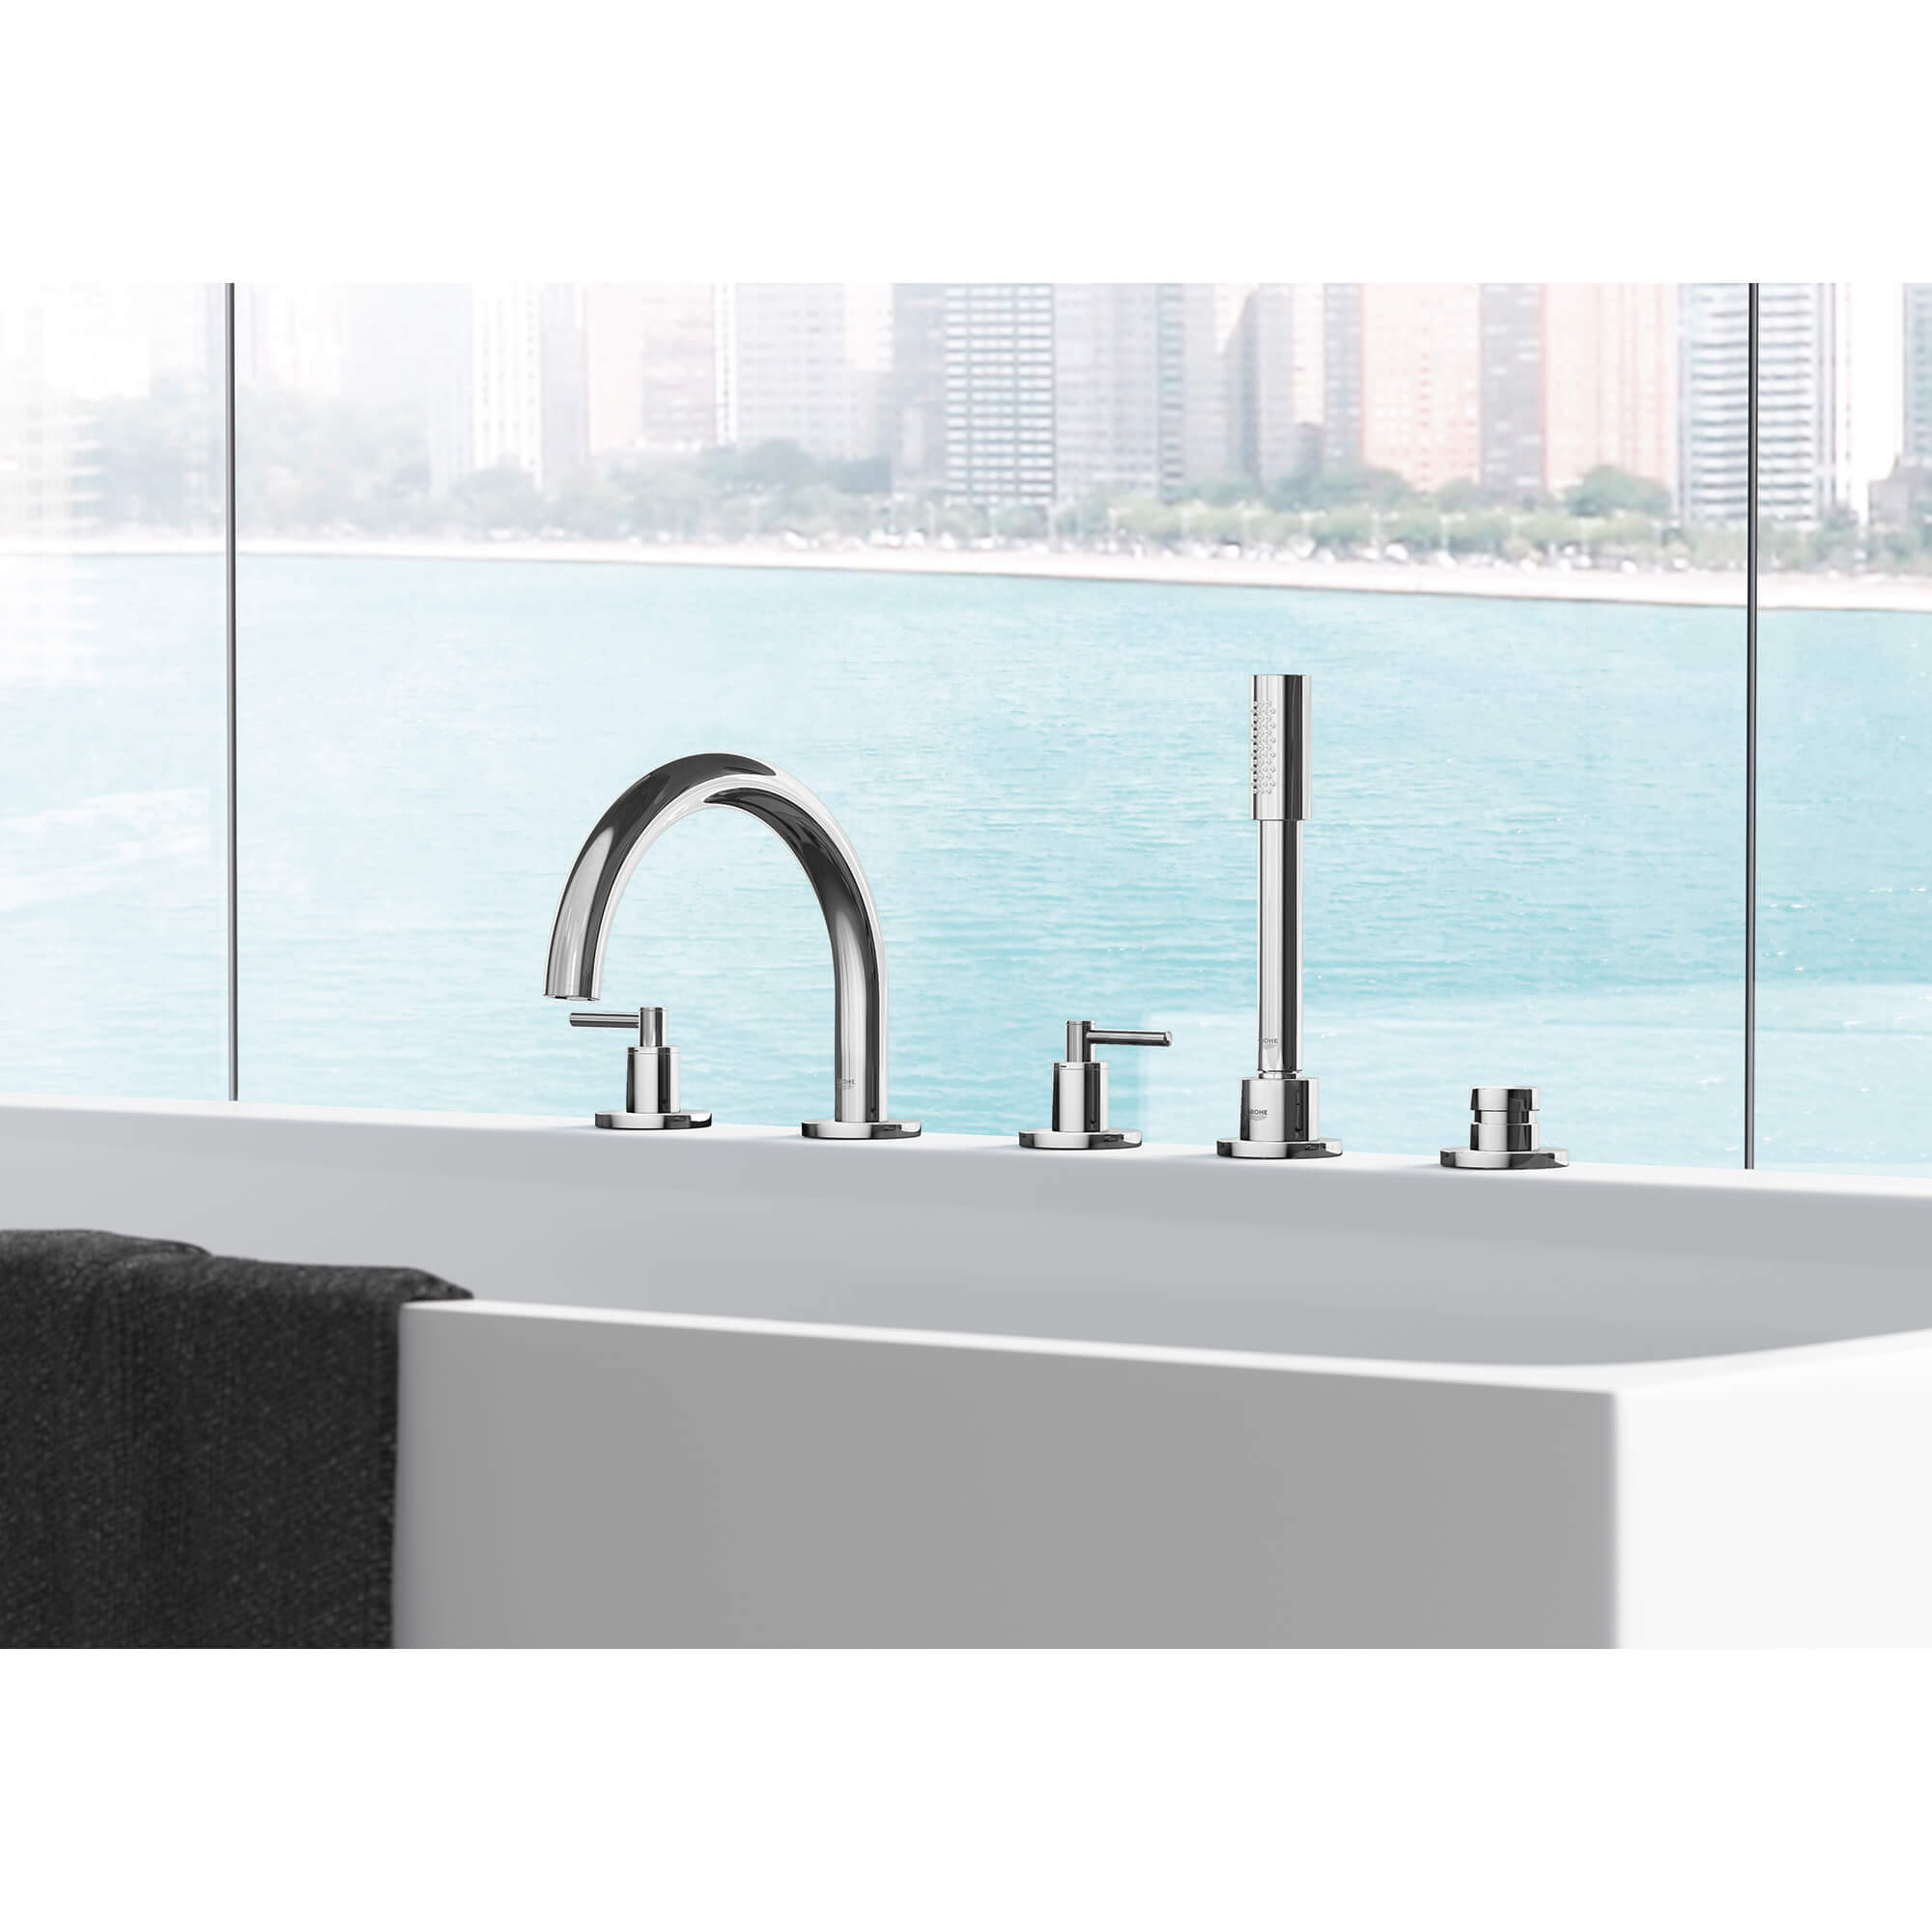 8-INCH WIDESPREAD 2-HANDLE S-SIZE BATHROOM FAUCET 1.2 GPM-0-large